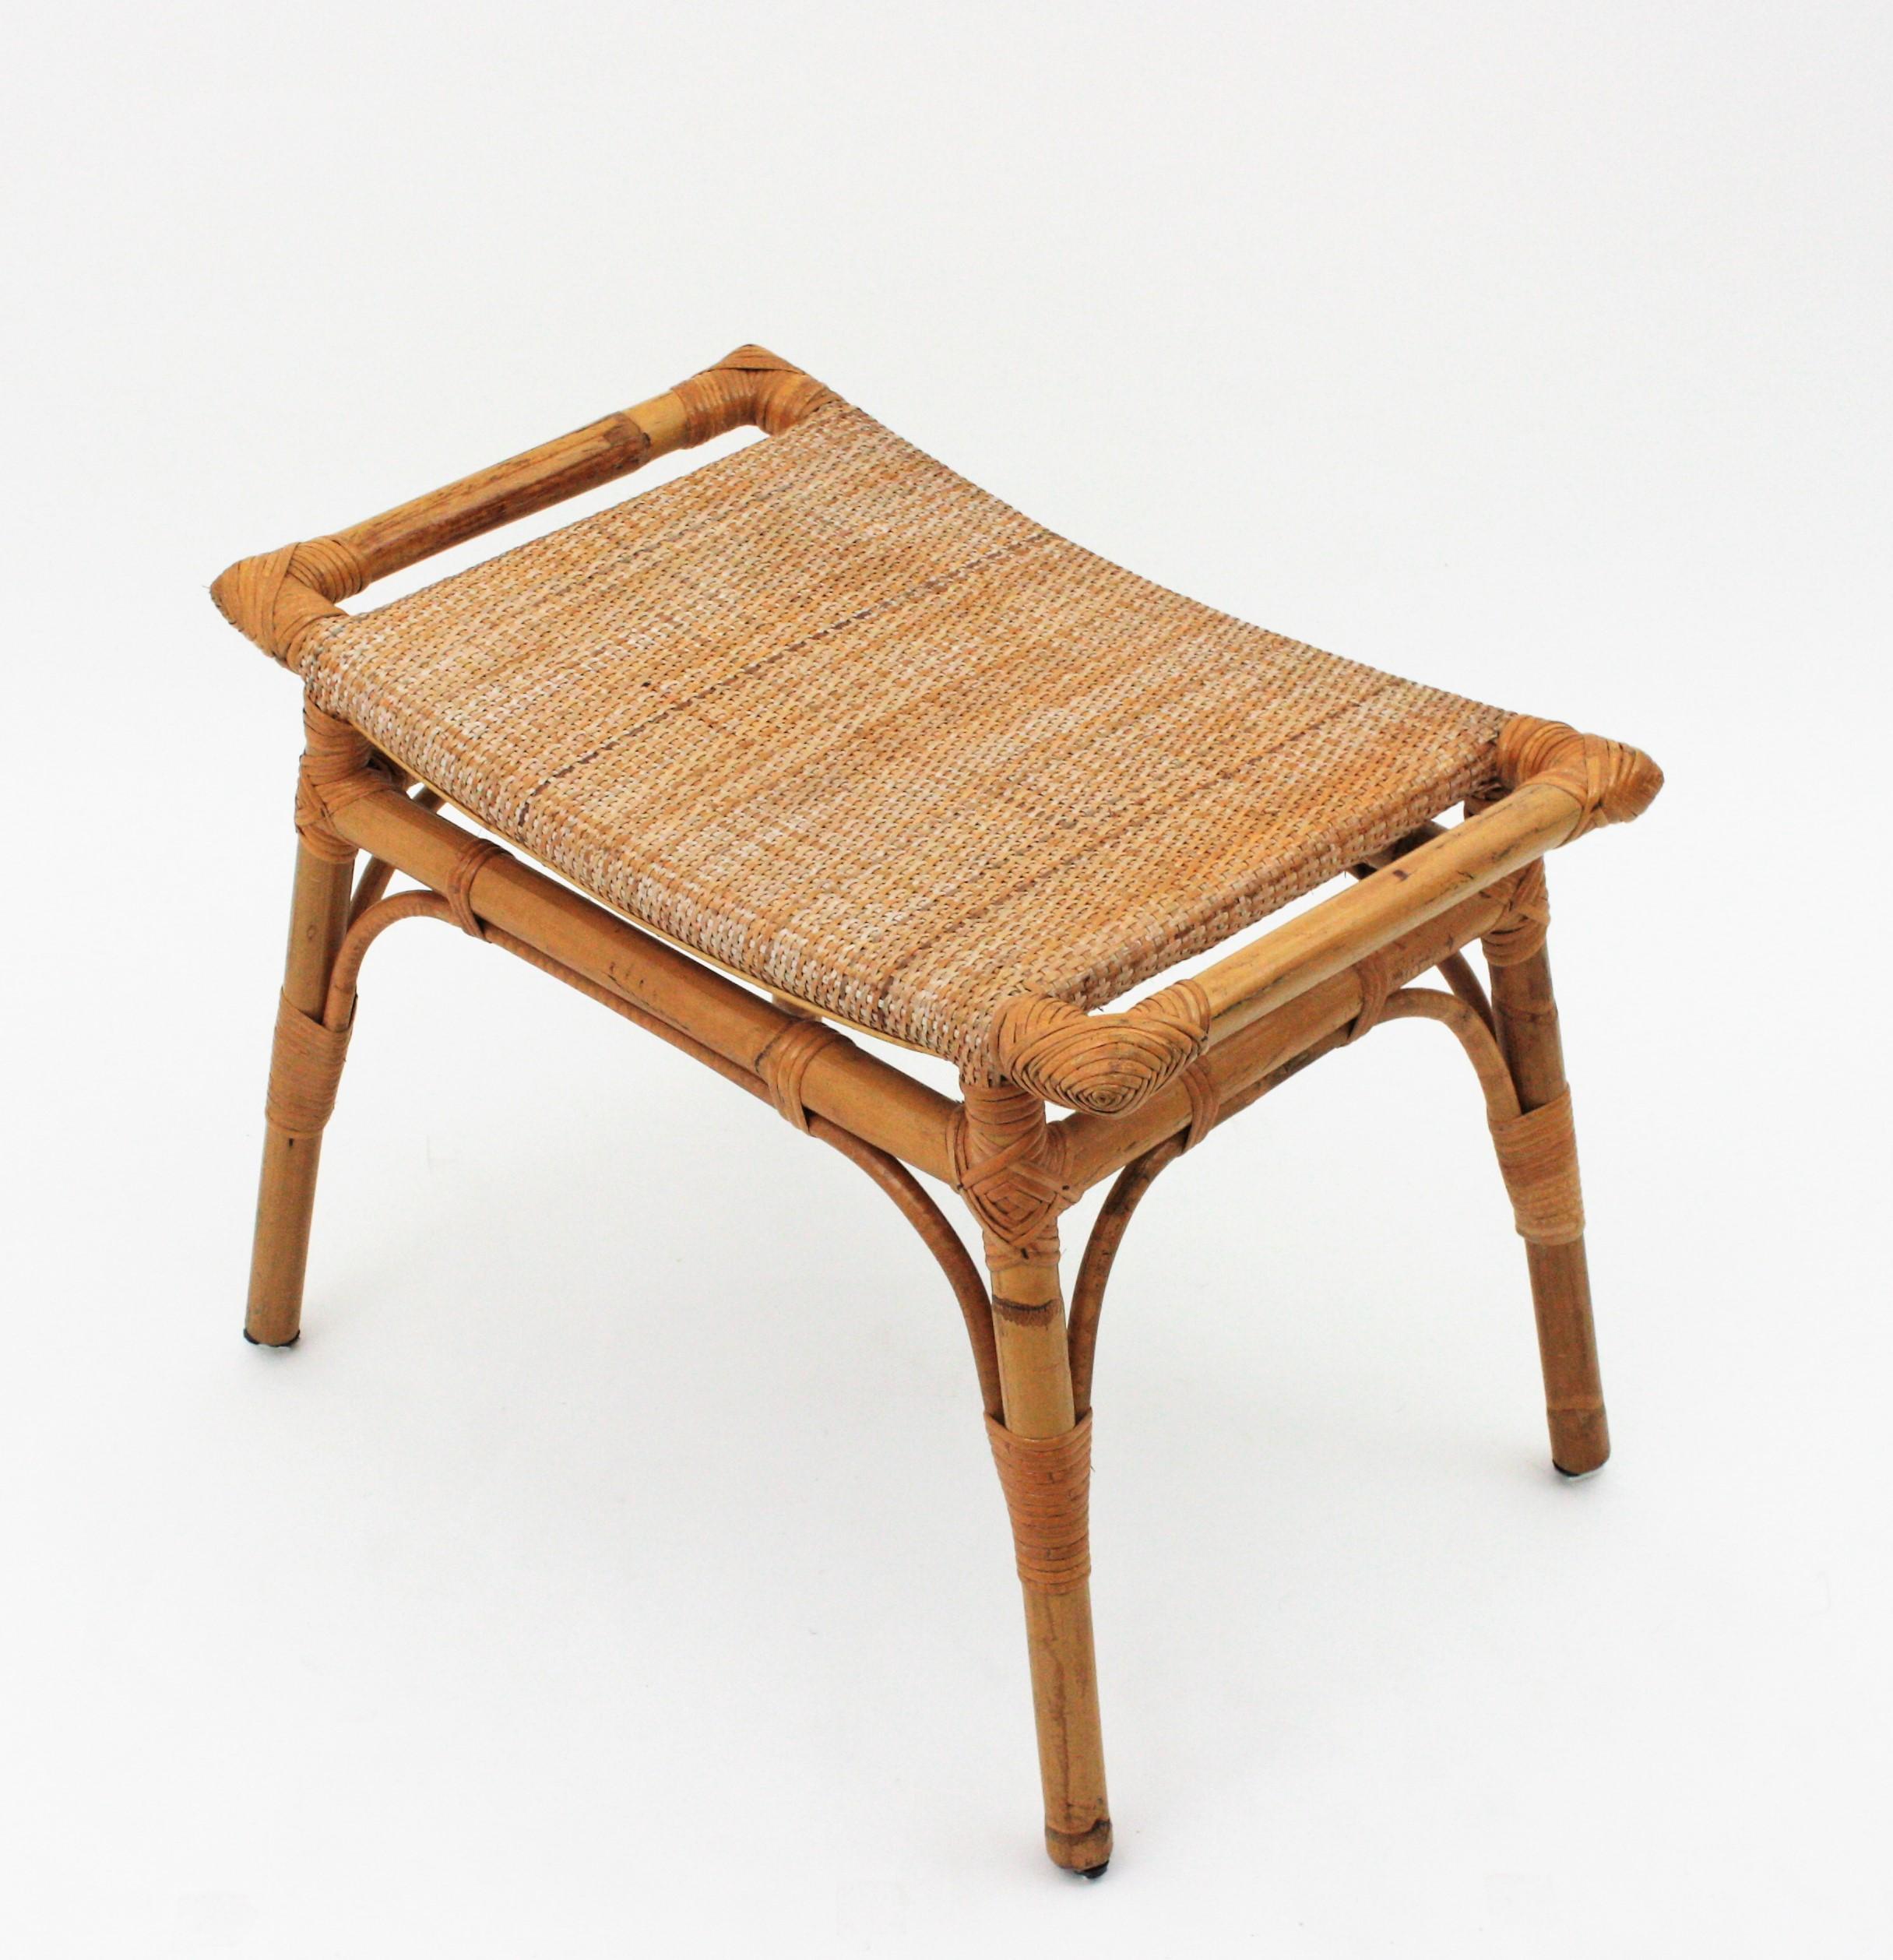 Bamboo Stool, Ottoman or Bench with Cane Seat 4